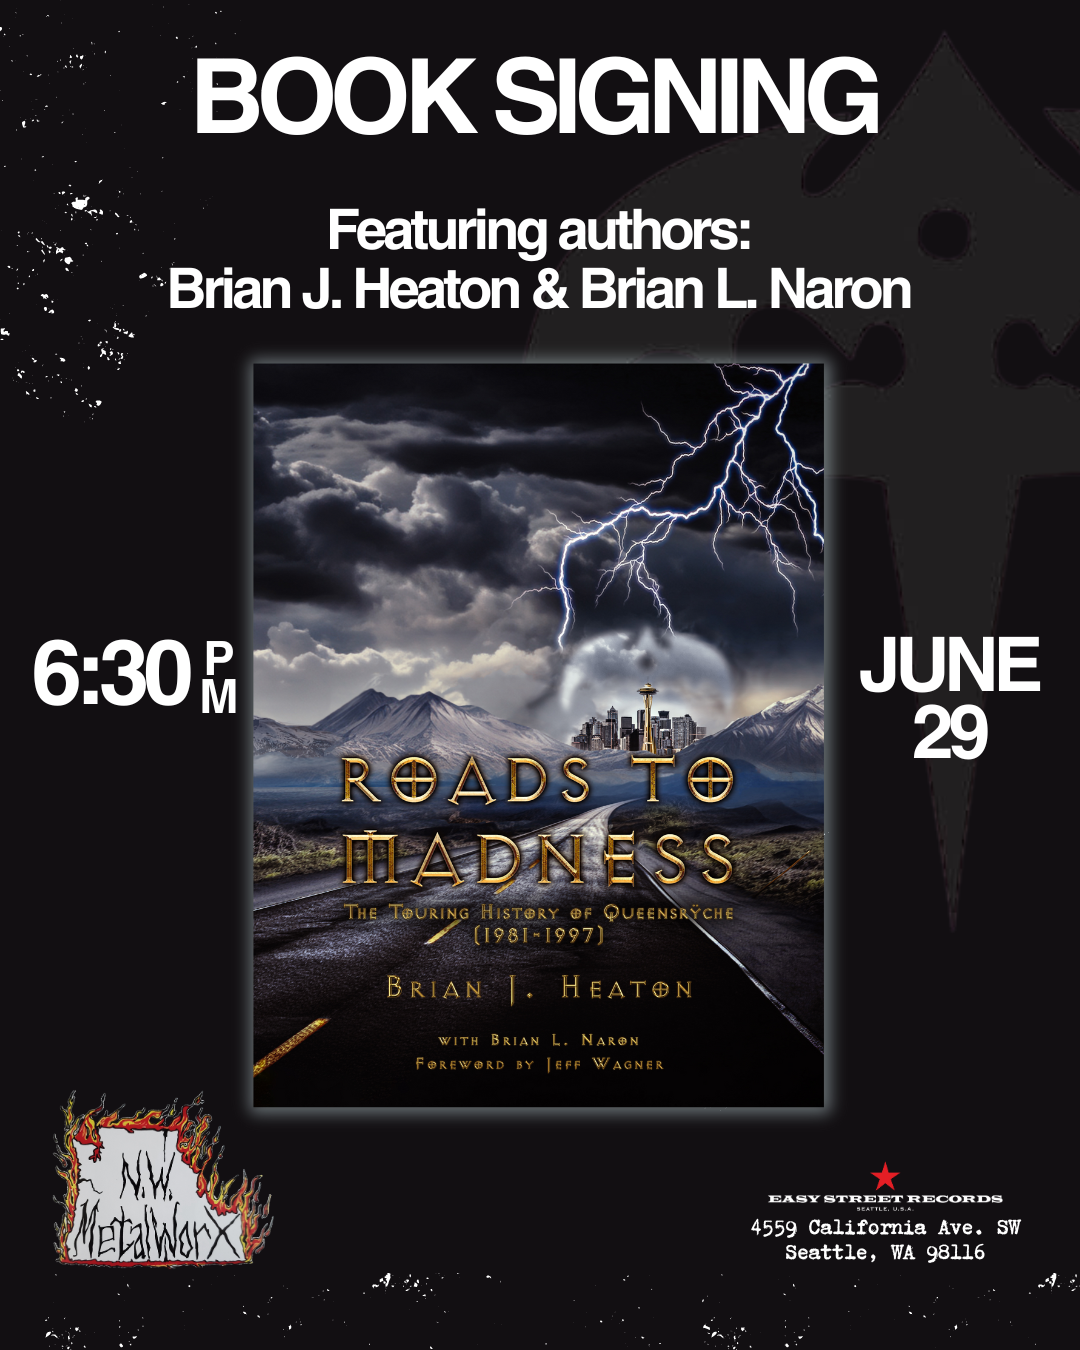 A book signing event for Roads to Madness will be held on June 29, at Easy Street Records in Seattle.